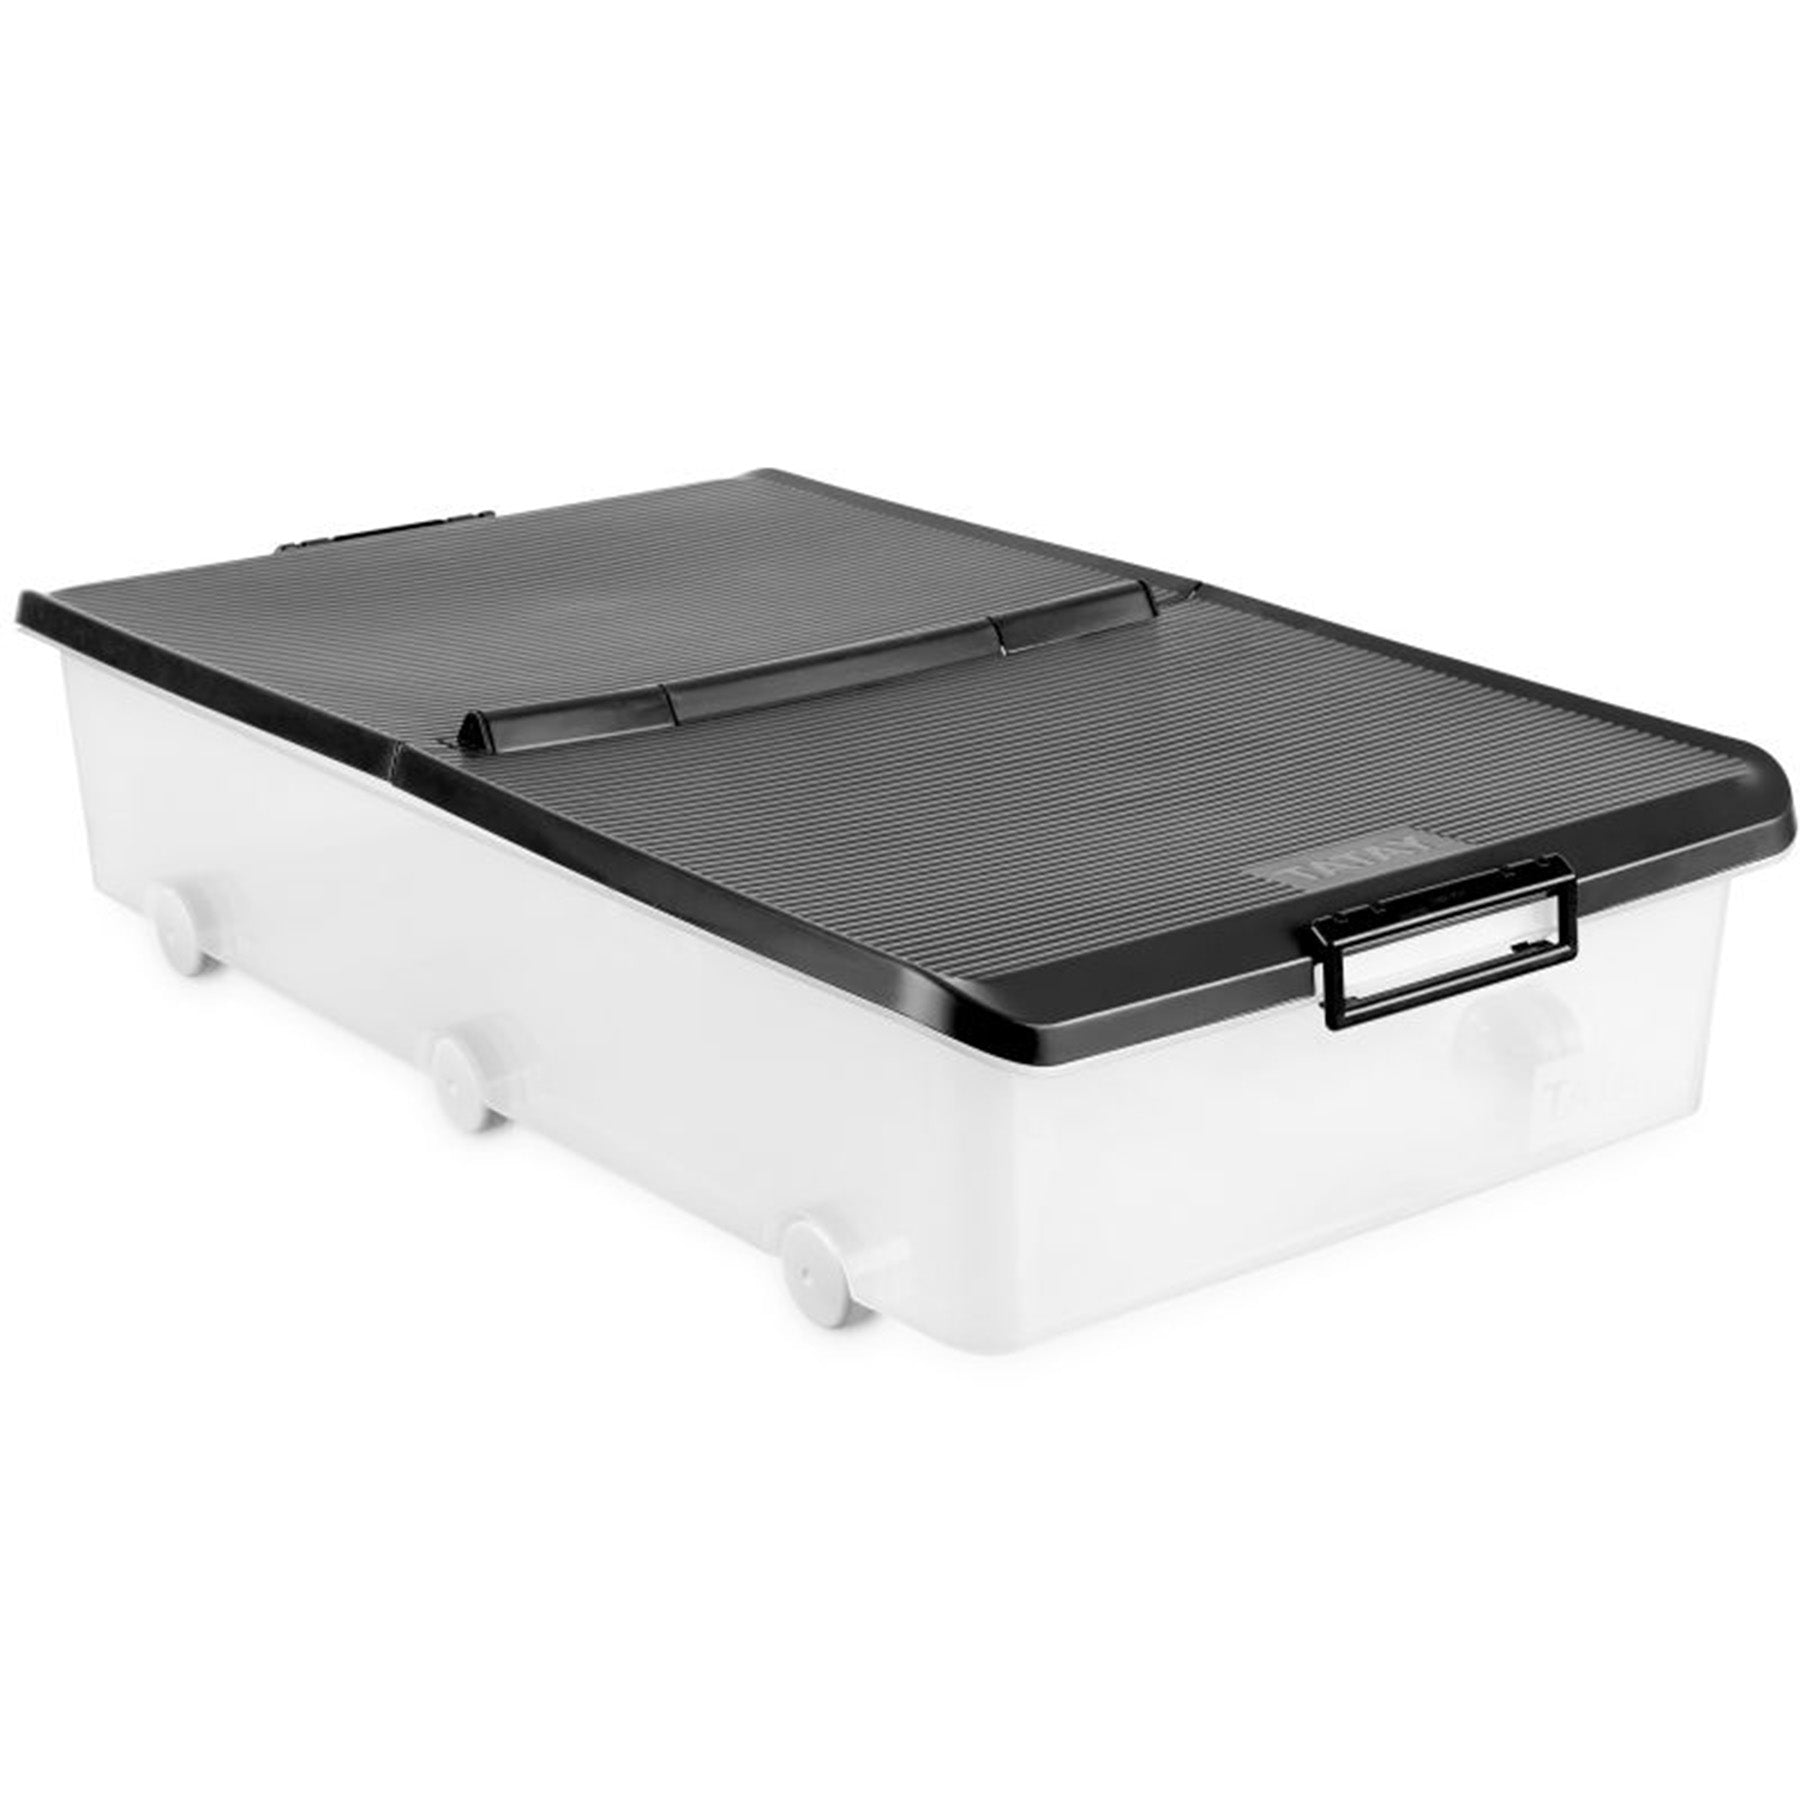 Under bed storage box with wheels - Black/Clear